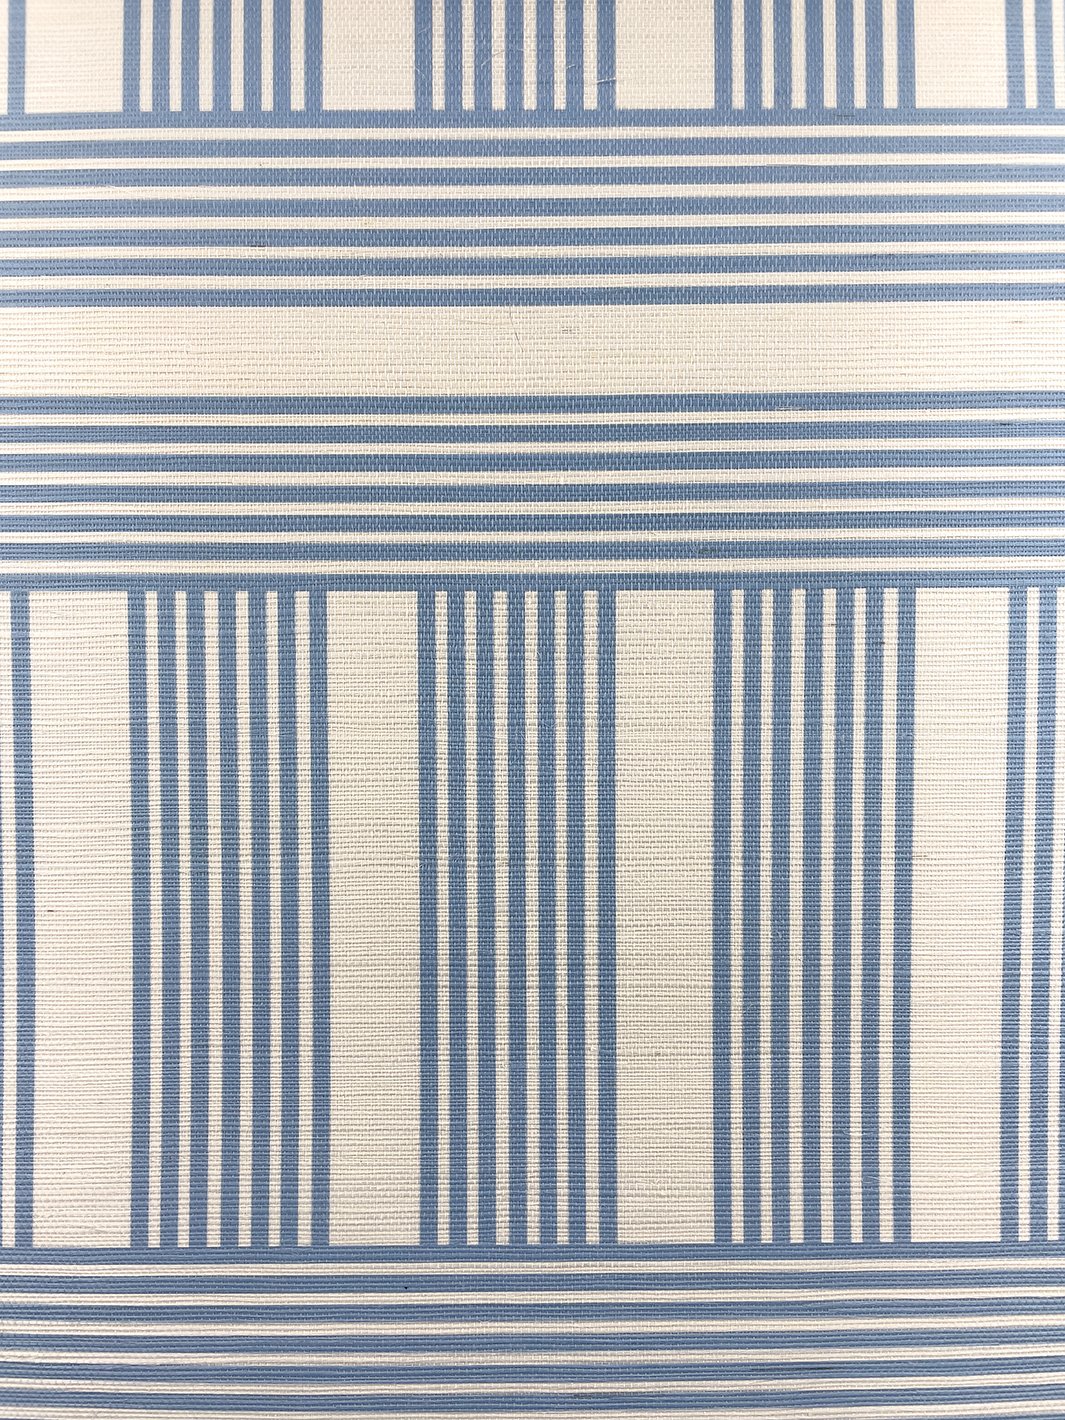 'Roman Holiday Grid' Grasscloth' Wallpaper by Barbie™ - Blue